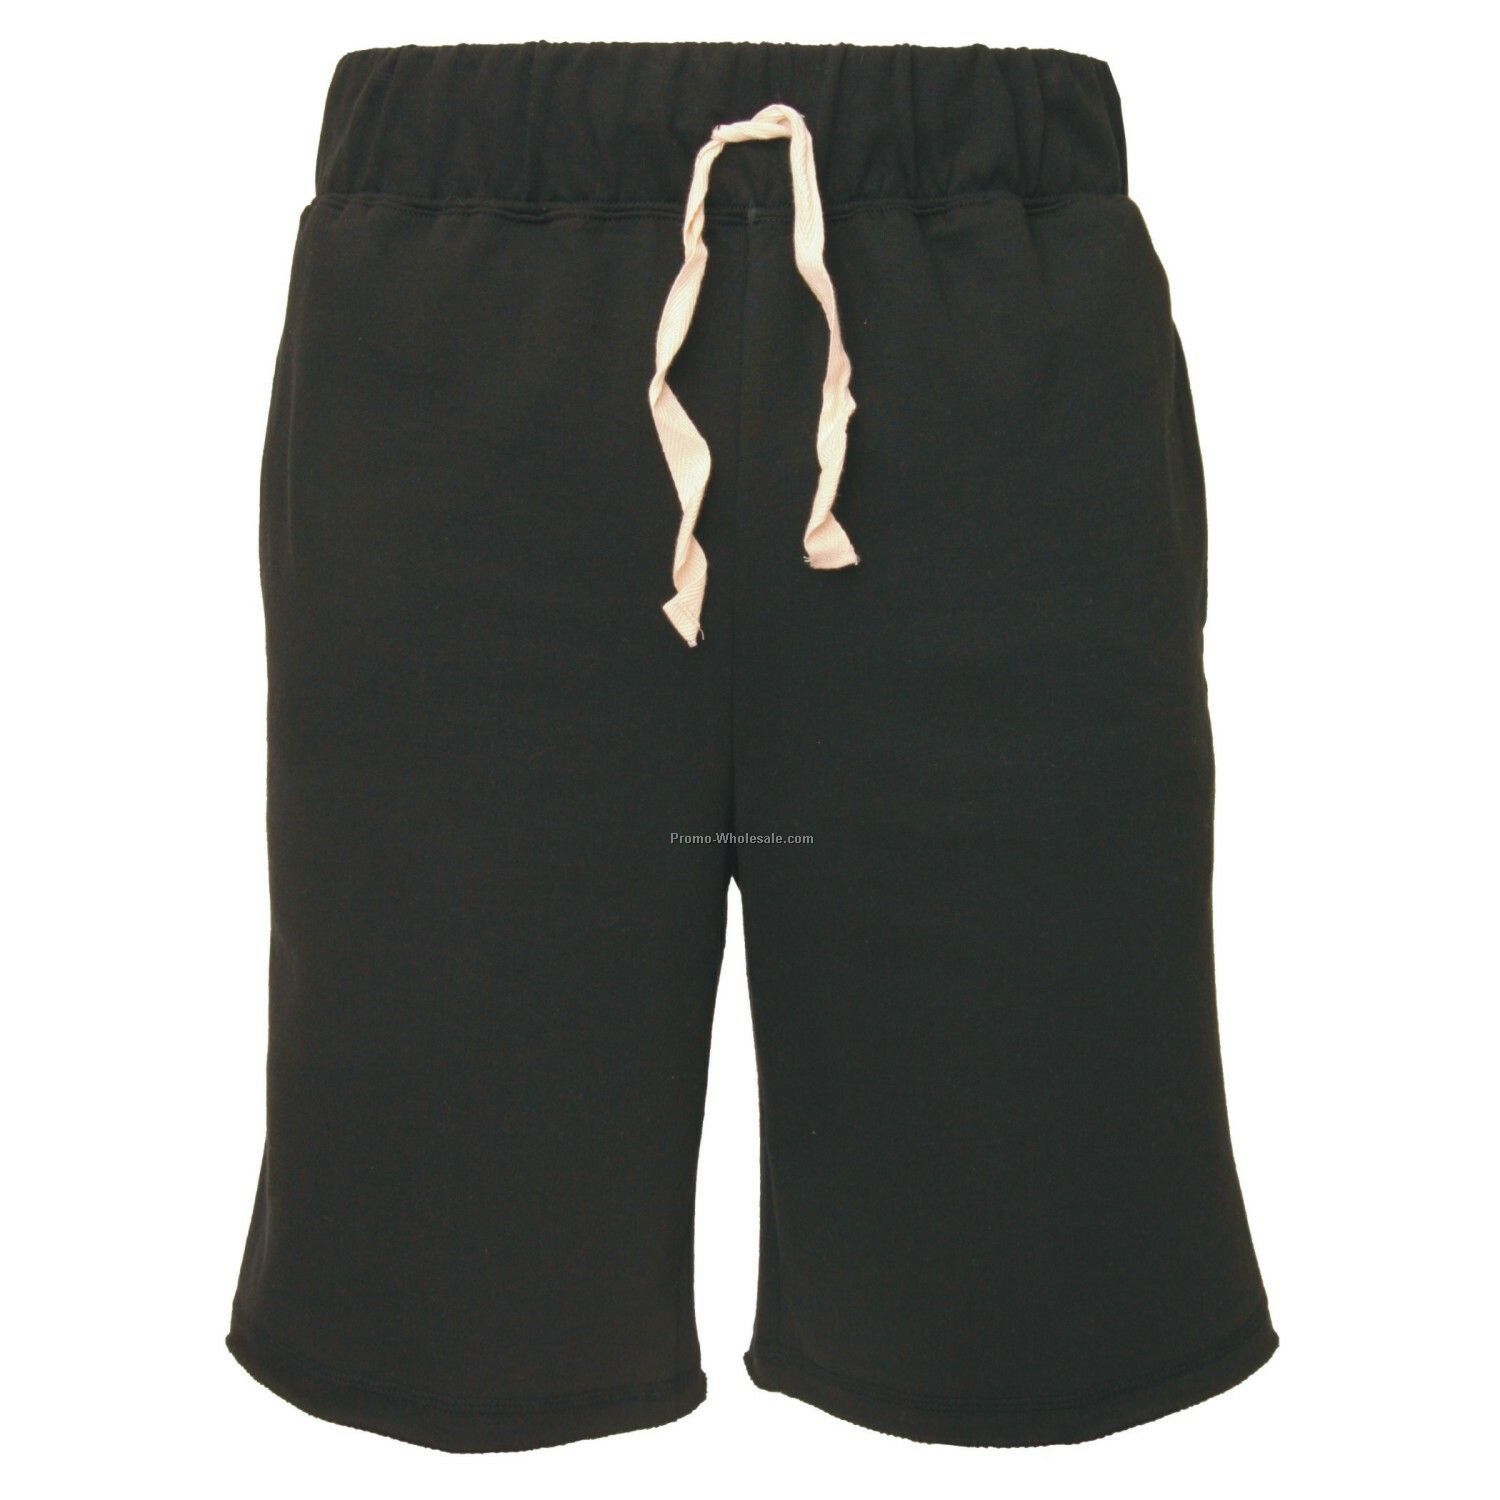 Youths' Black First Place Fleece Shorts With 2 Side Pockets (Ys-yl)